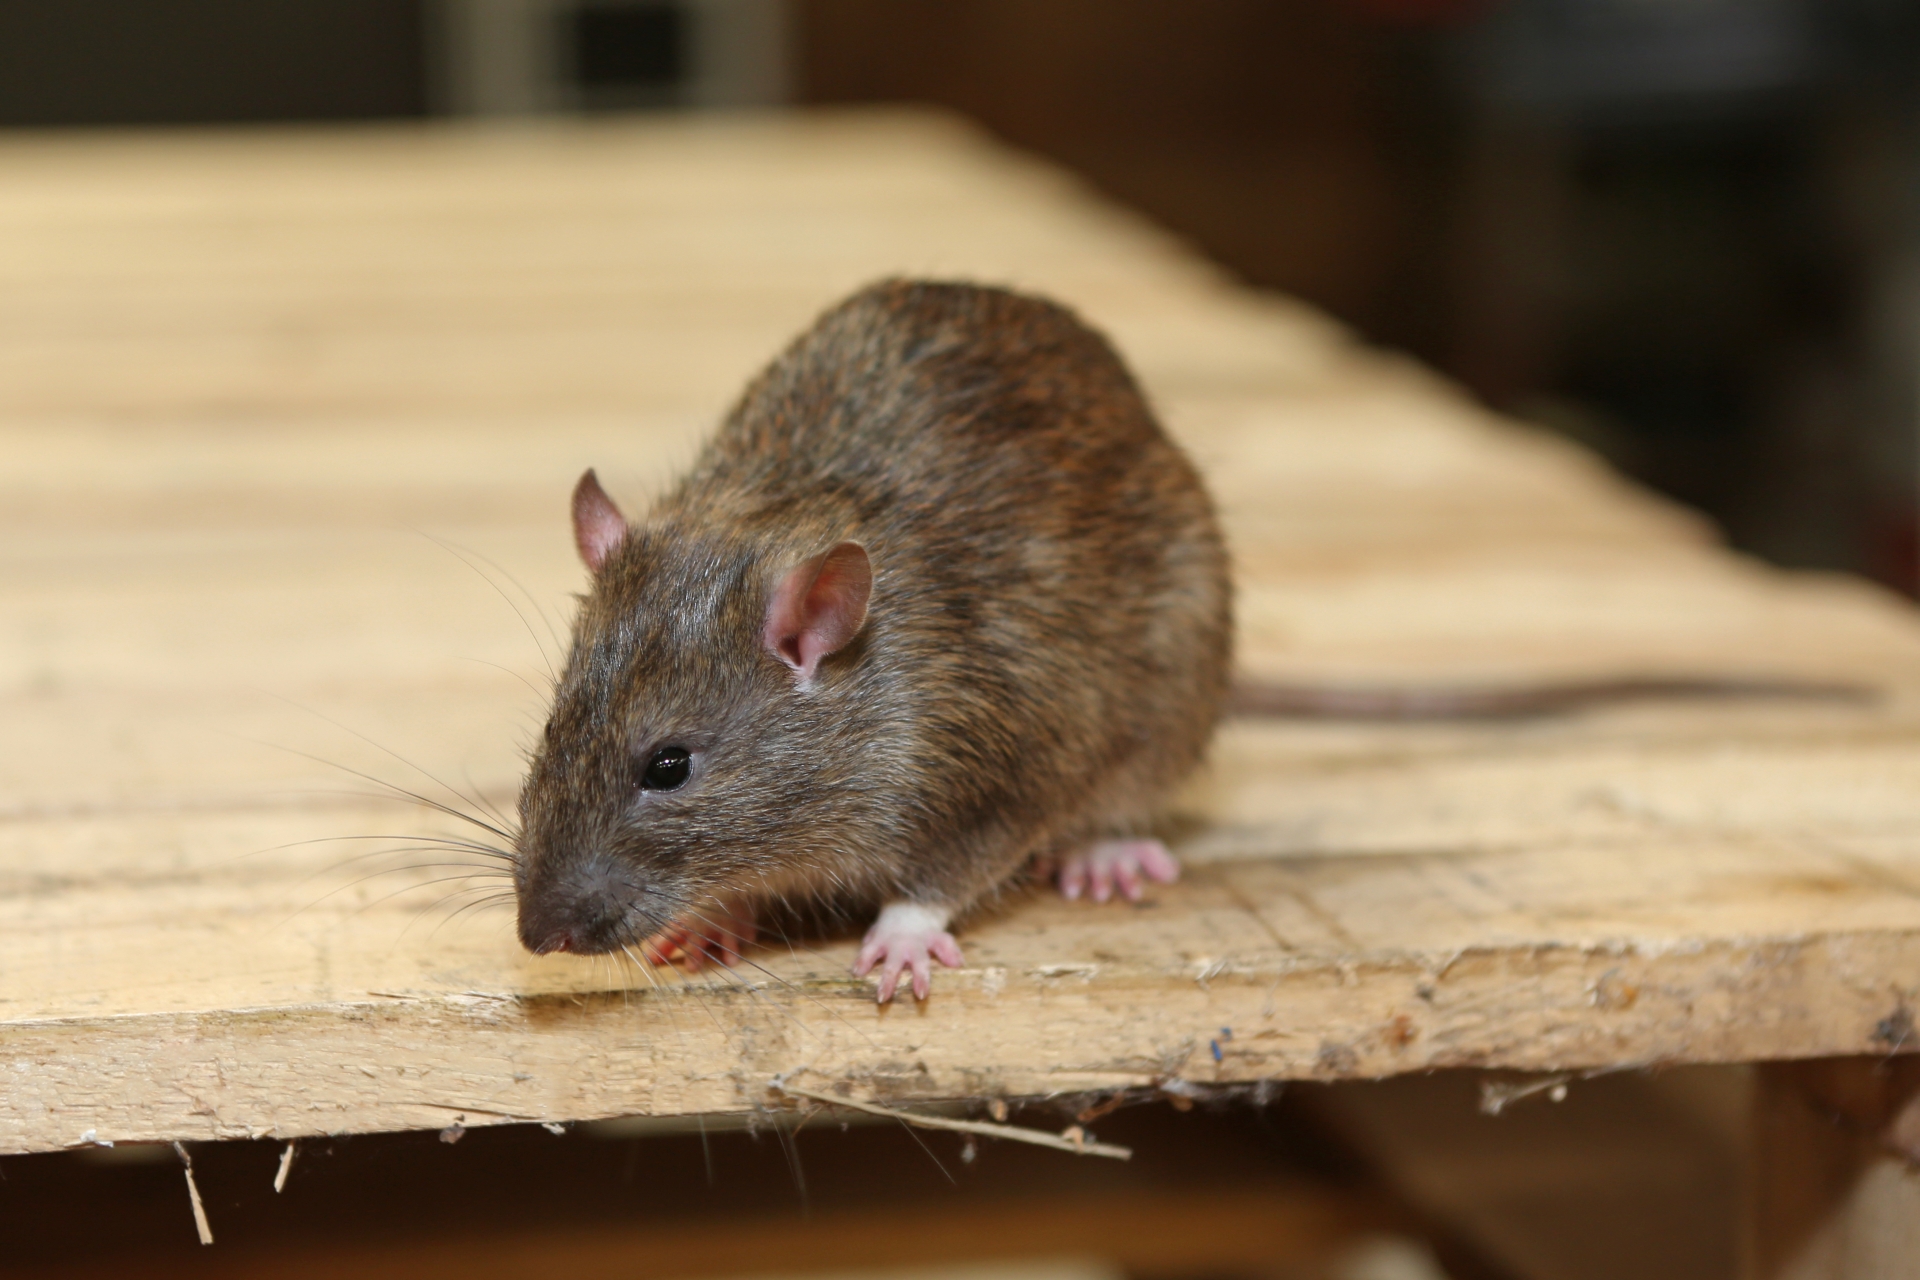 Rat extermination, Pest Control in Kentish Town, NW5. Call Now 020 8166 9746